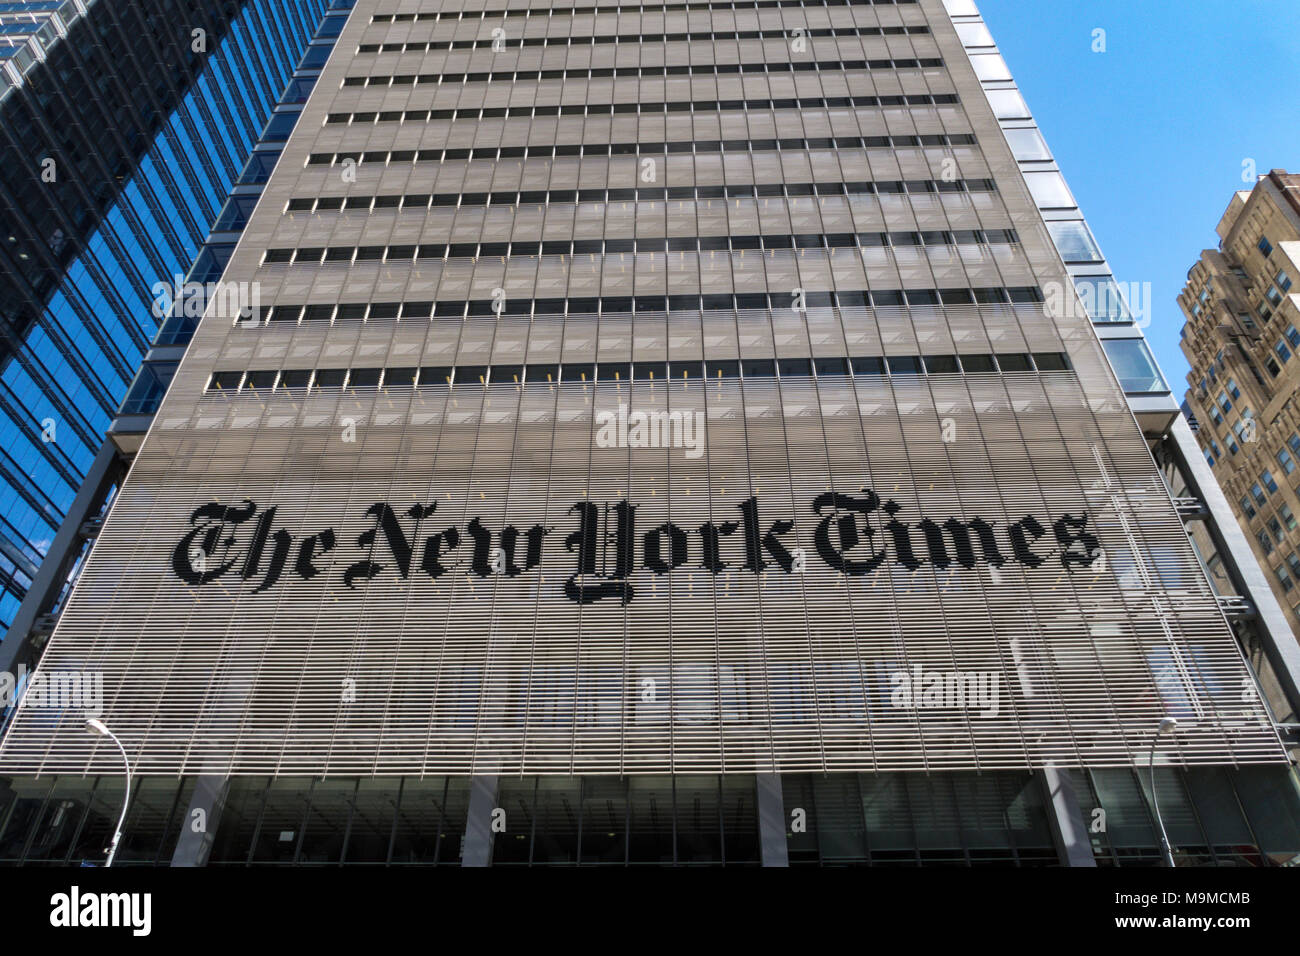 Le New York Times Building, New York City, USA Banque D'Images